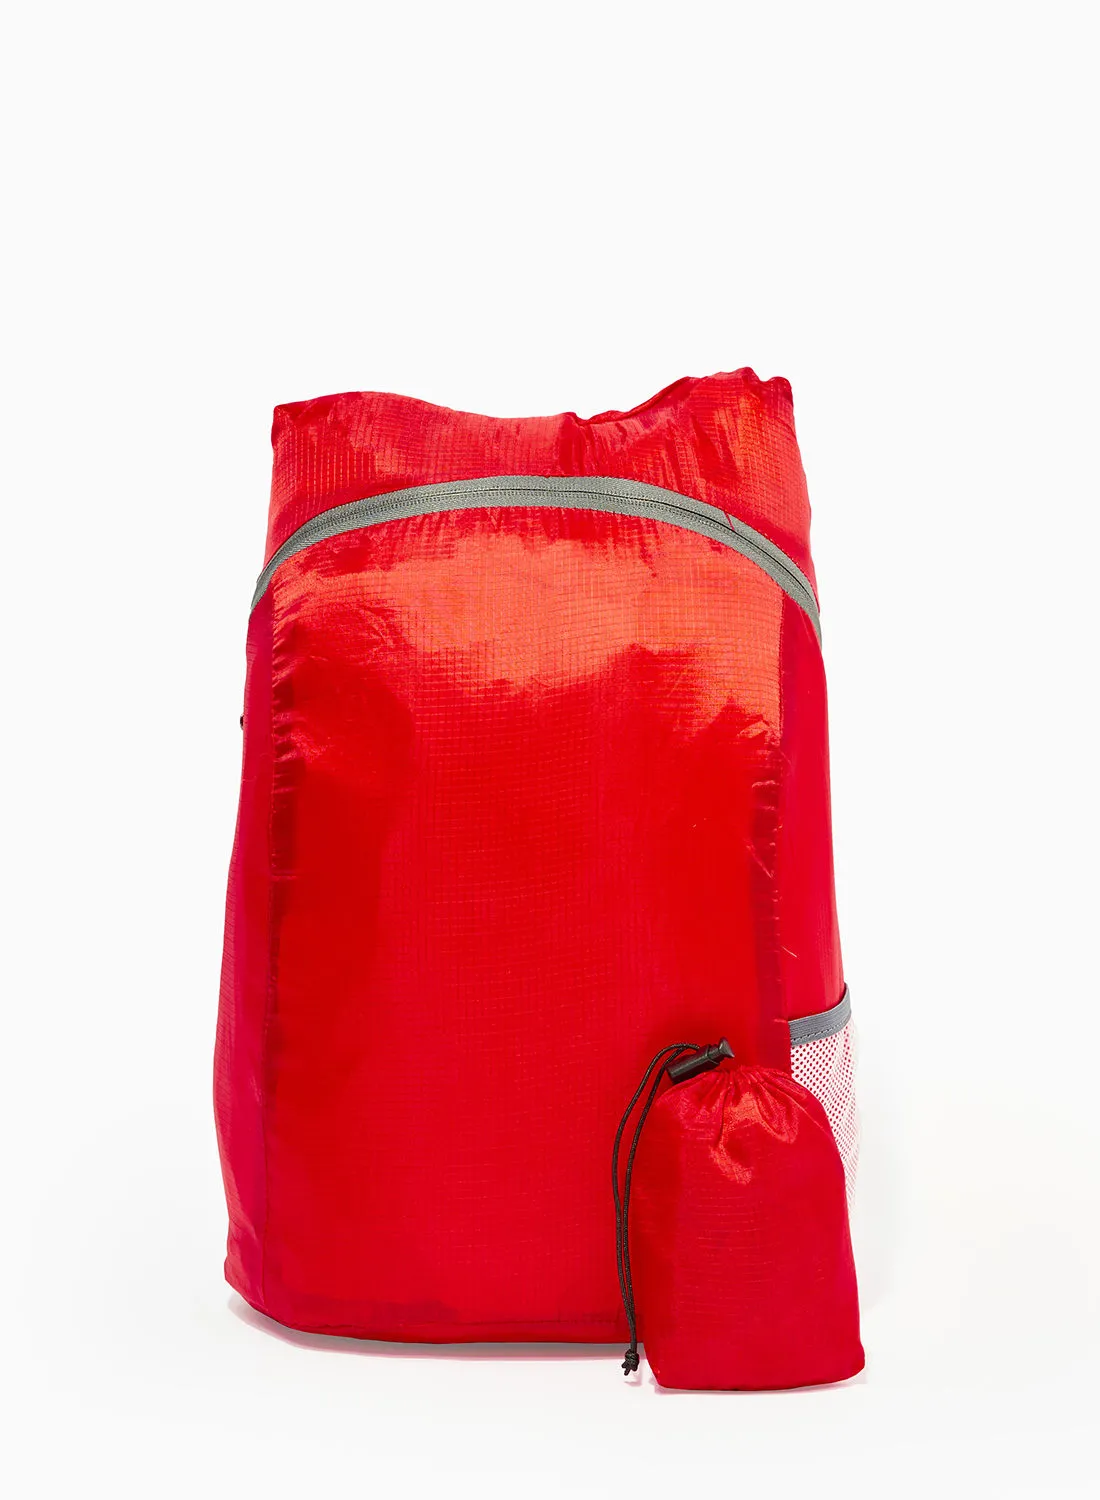 Amal Casual Dyed Polyester Unisex One Size Backpack Red